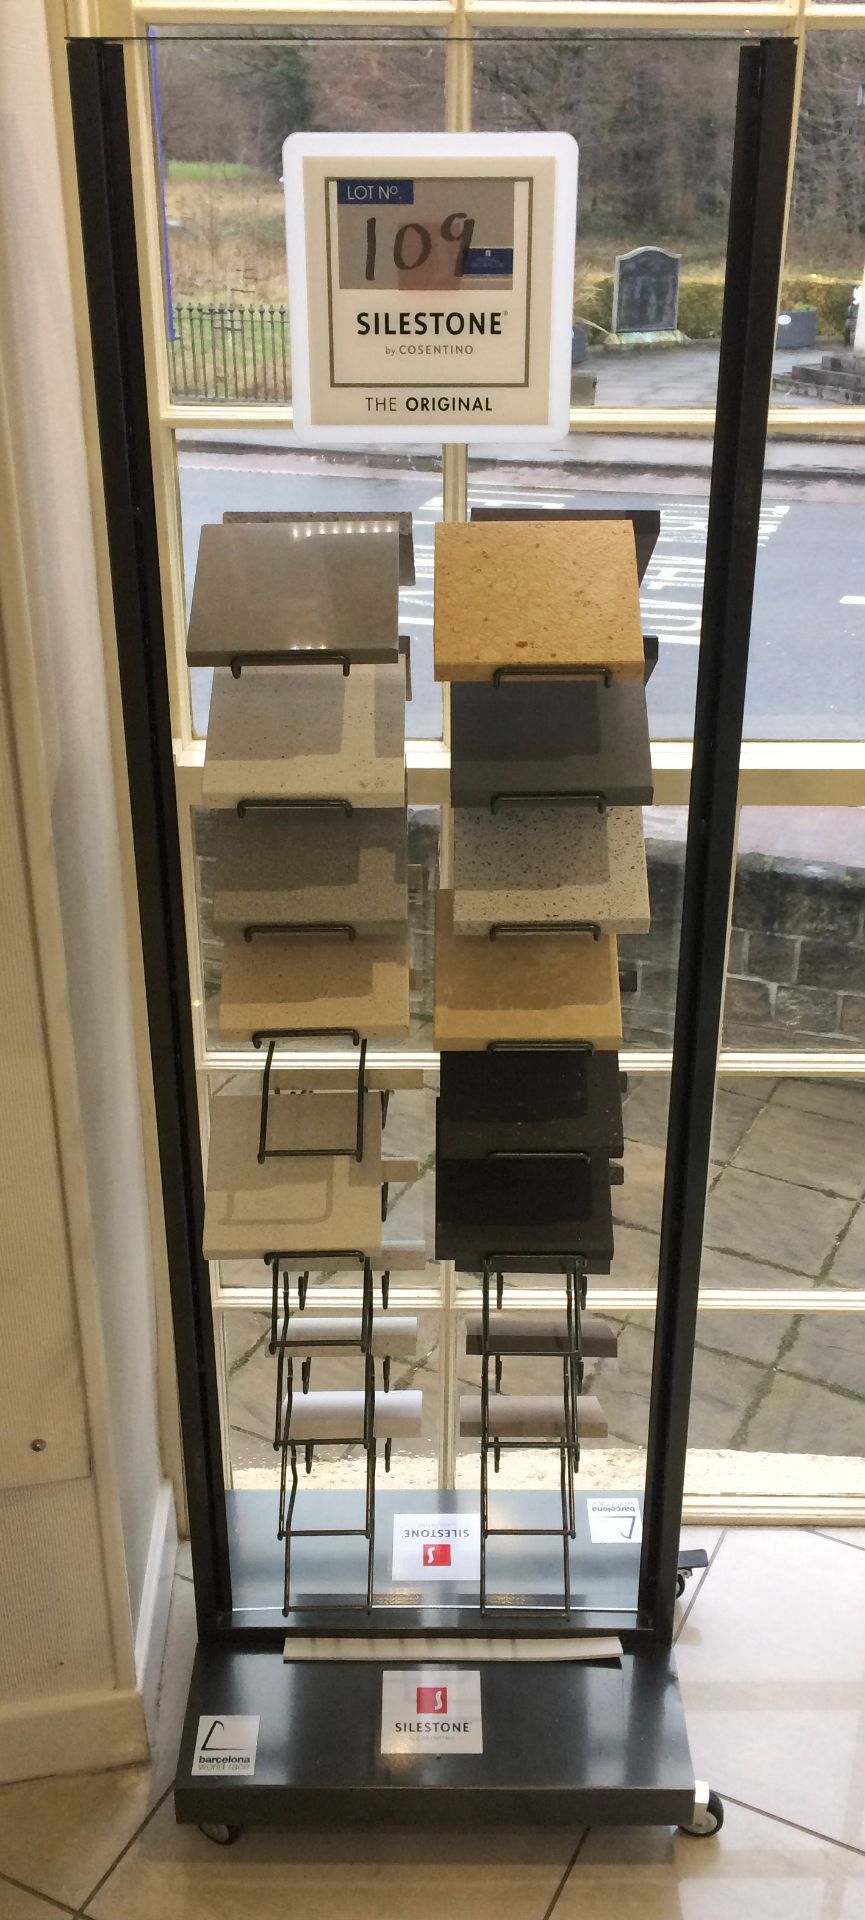 A Cosentino Silestone Display Stand and Samples.